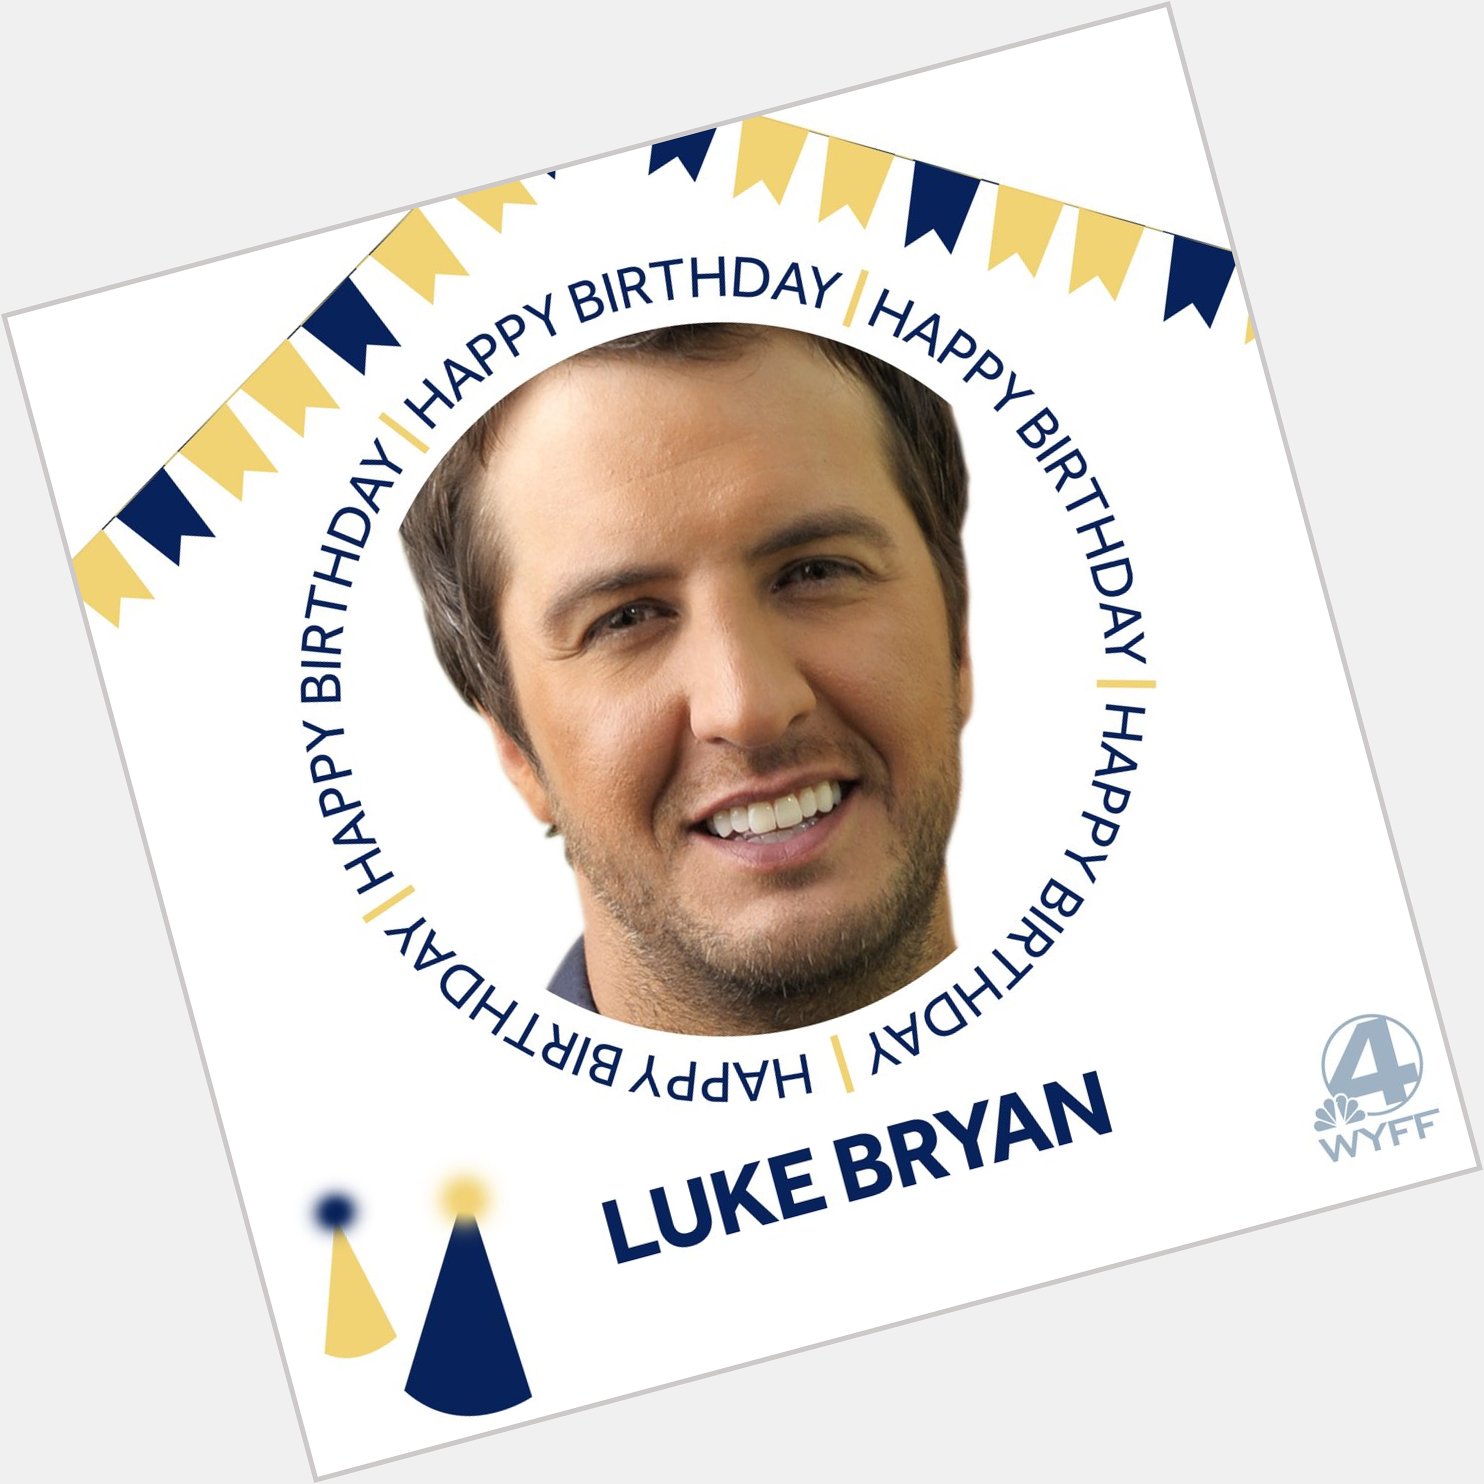 Happy Birthday, Luke!   LIKE if you\re a fan and tell us what\s your favorite Luke Bryan song?   